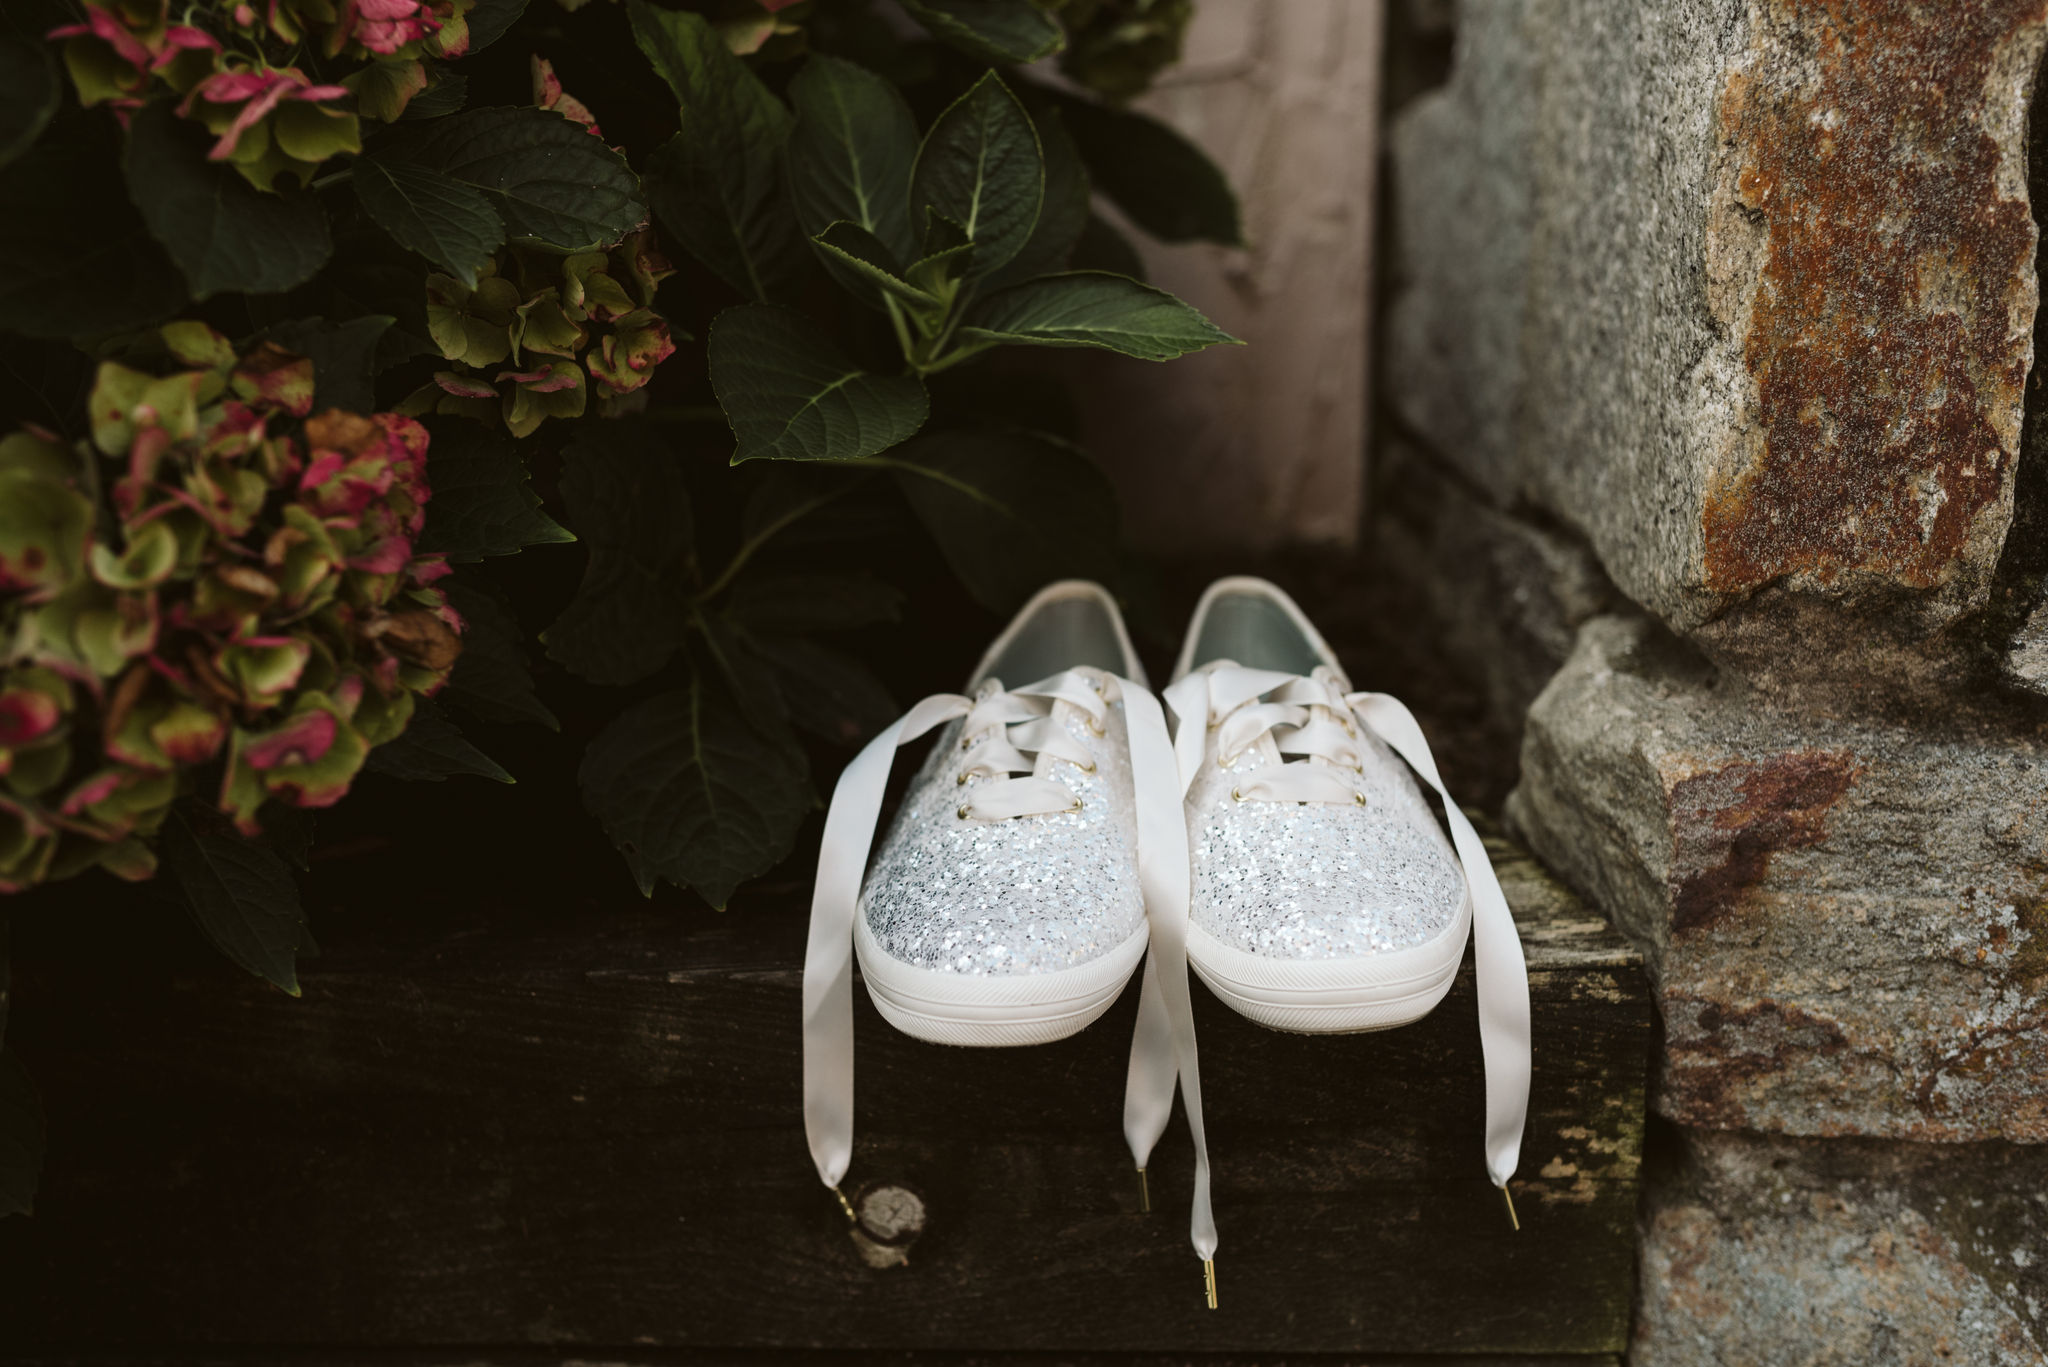  Phoenix Maryland, Baltimore Wedding Photographer, Eagle’s Nest Country Club, Classic, Romantic, Spring, Bridal Shoes, Glitter Keds 